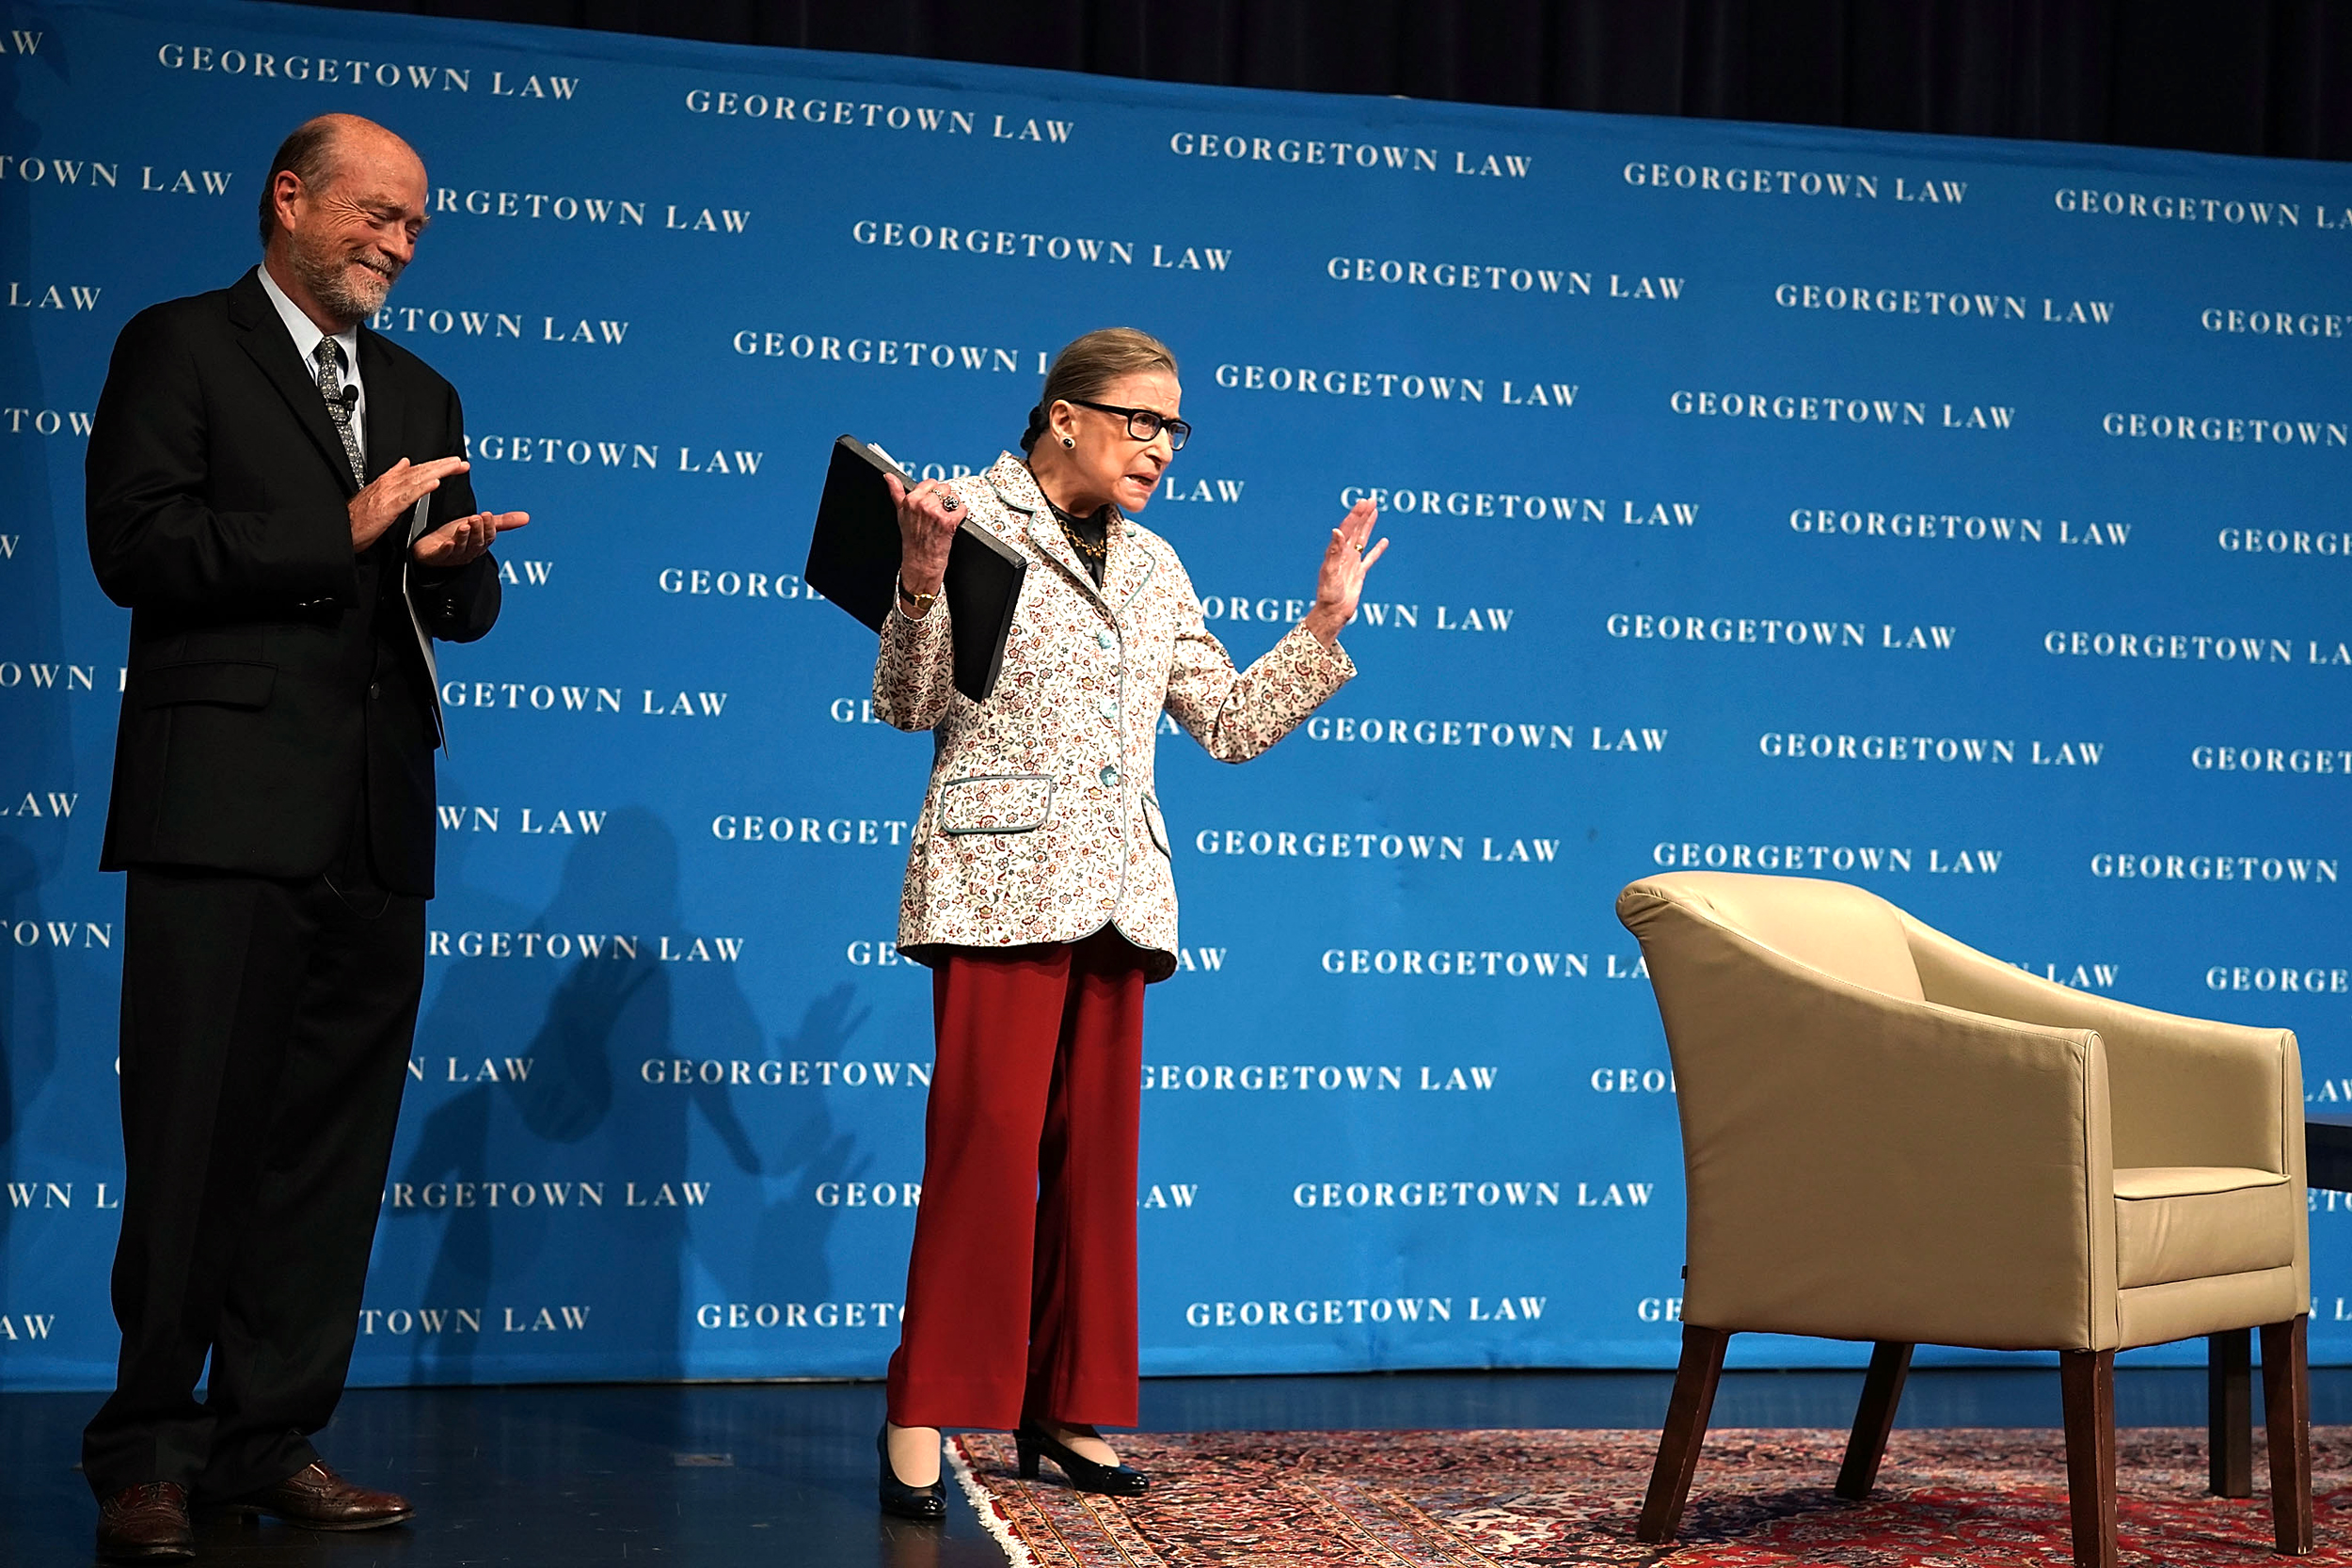 PHOTO: U.S. Supreme Court Justice Ruth Bader Ginsburg (R) waves to students as she arrives at a lecture on Sept. 26, 2018, at Georgetown University Law Center in Washington, D.C.